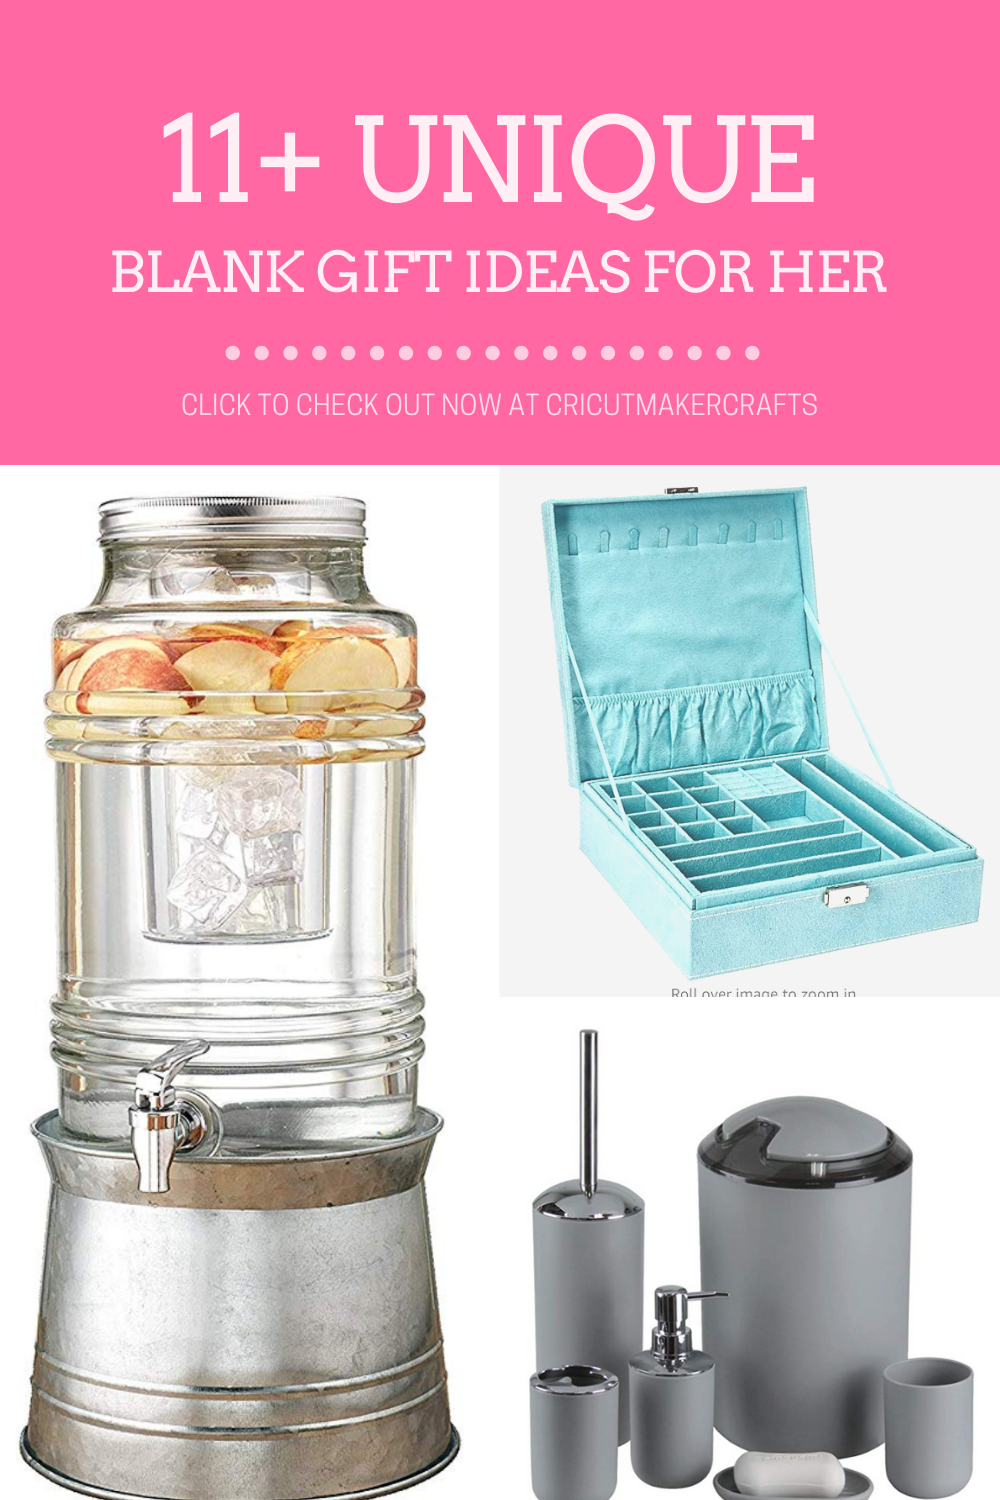 Water dispenser, jewelry box, toilet set for creating personalized gifts for mom